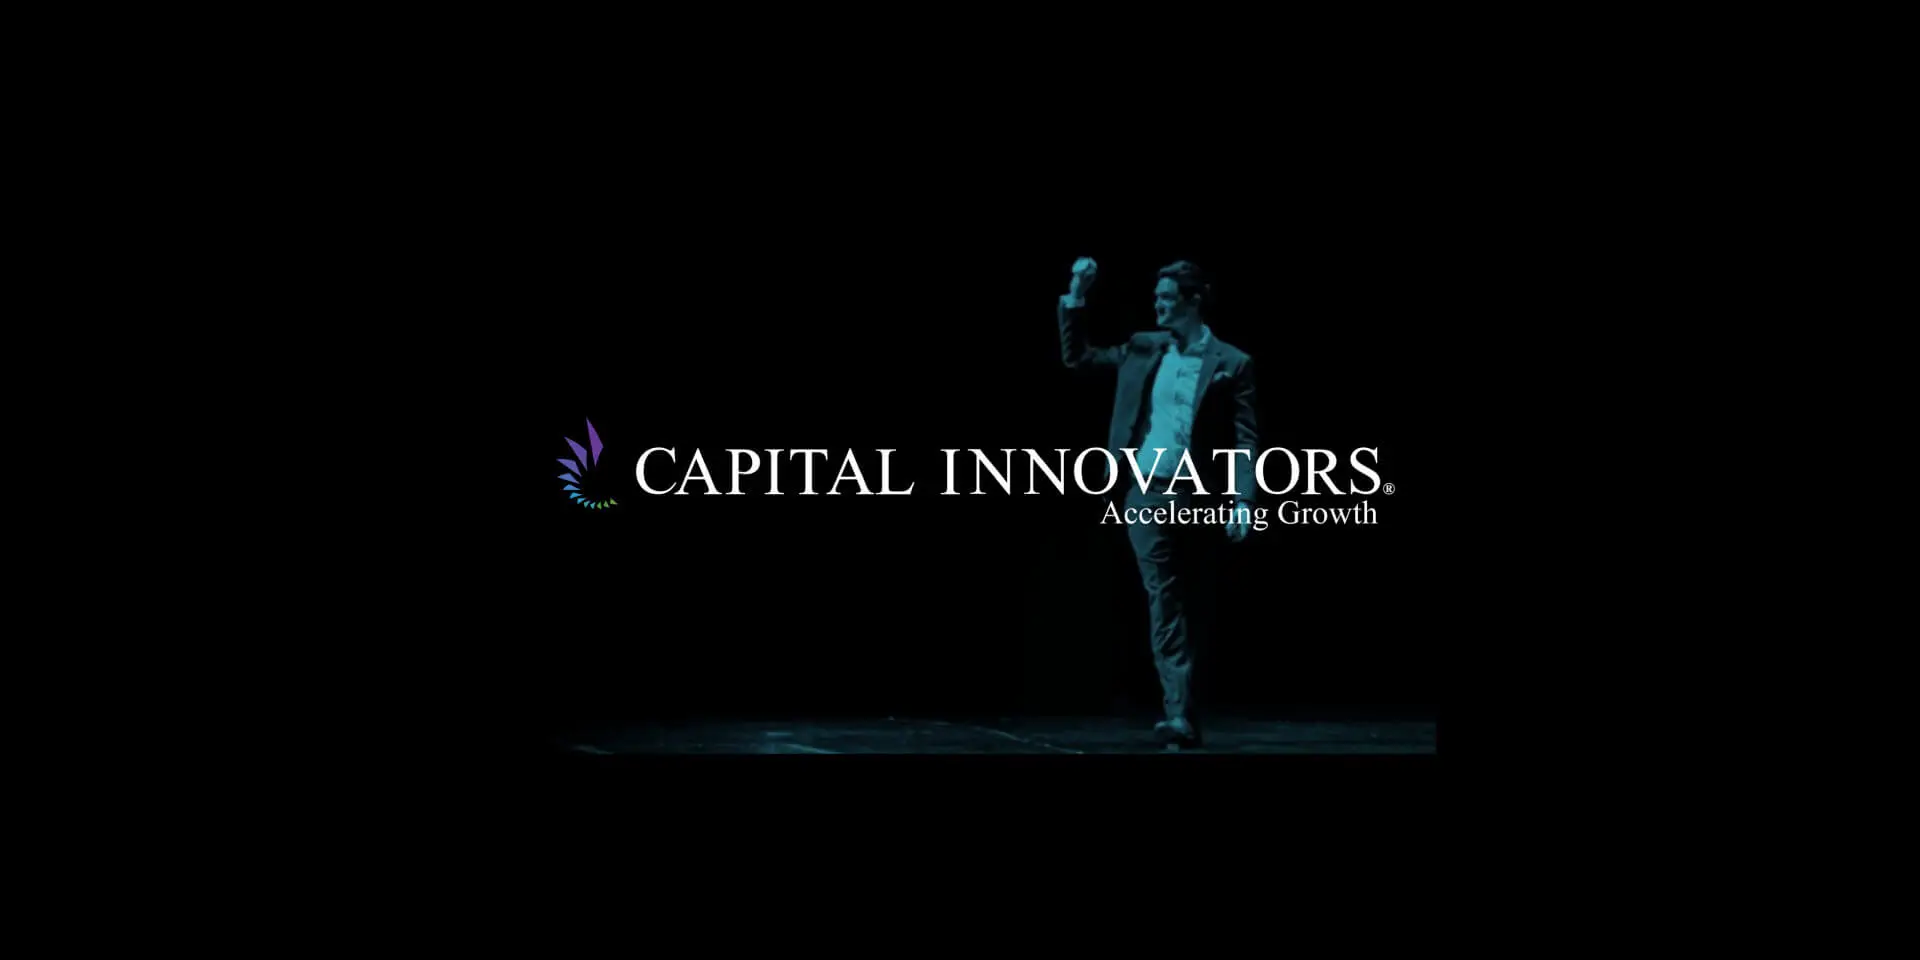 Brian’s Journey with Capital Innovators